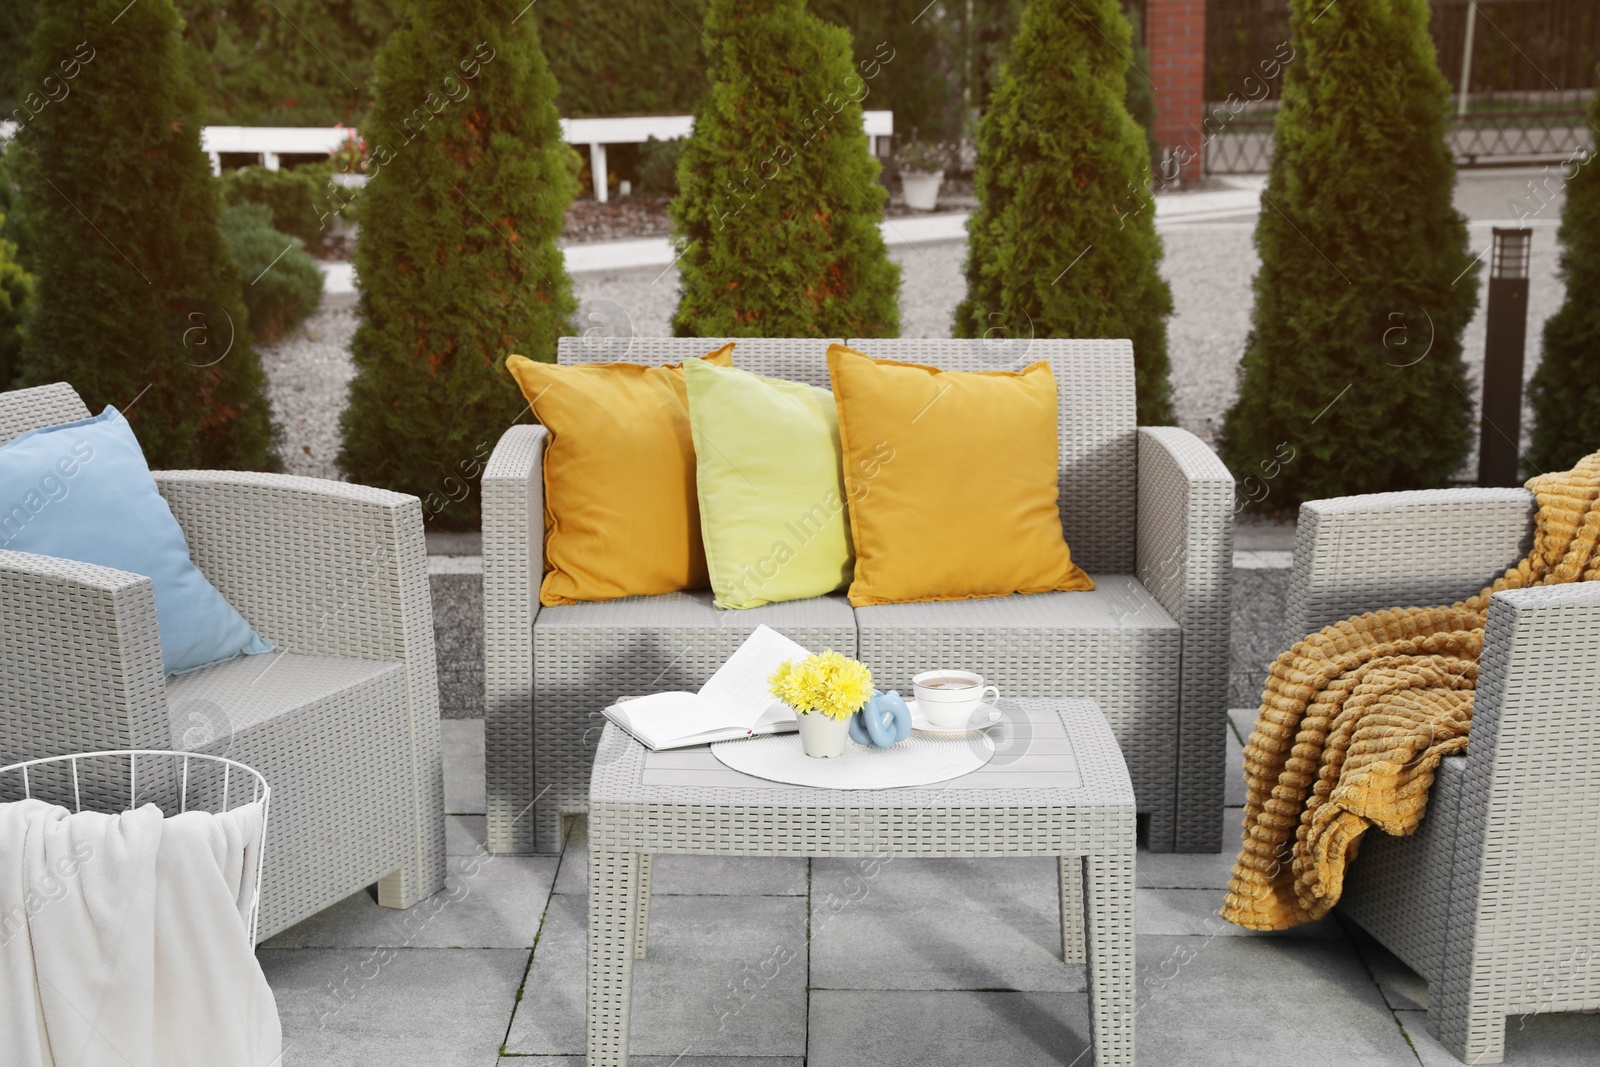 Photo of Beautiful rattan garden furniture, soft pillows and different decor elements in backyard